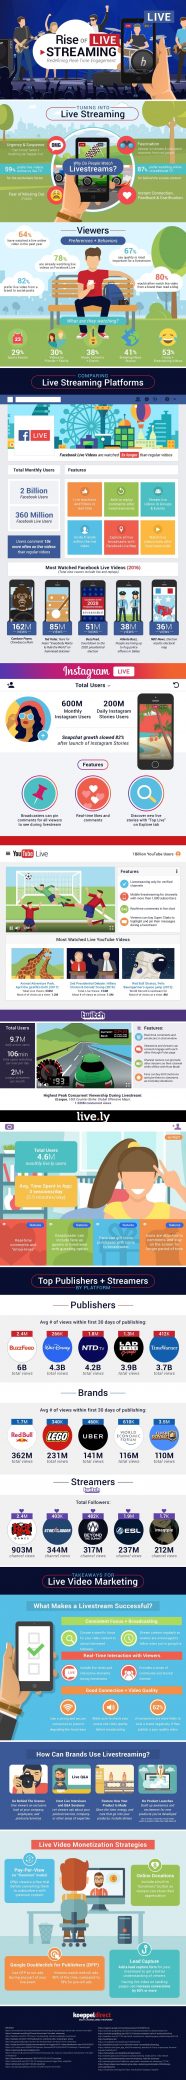 The Rise of Live Streaming [Infographic]